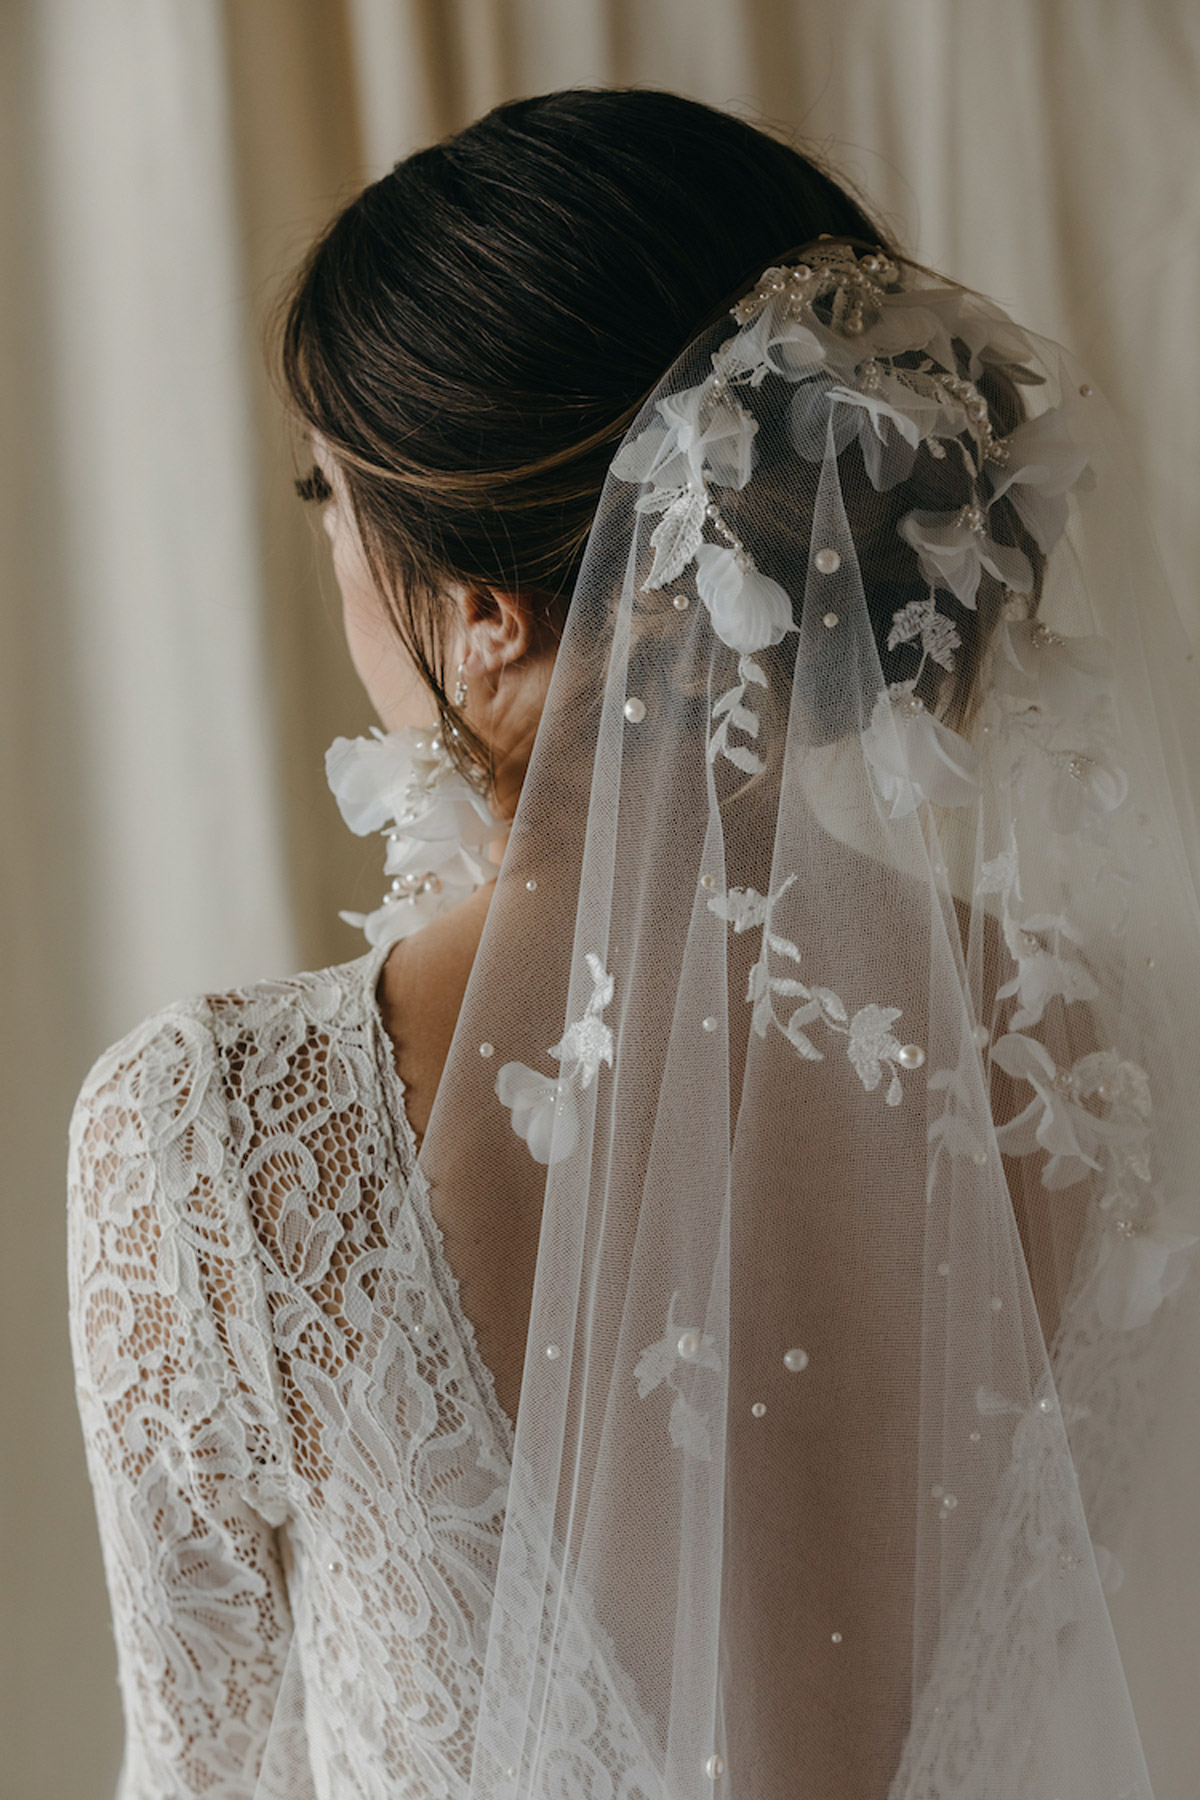 What to Do with Your Wedding Veil After the Big Day